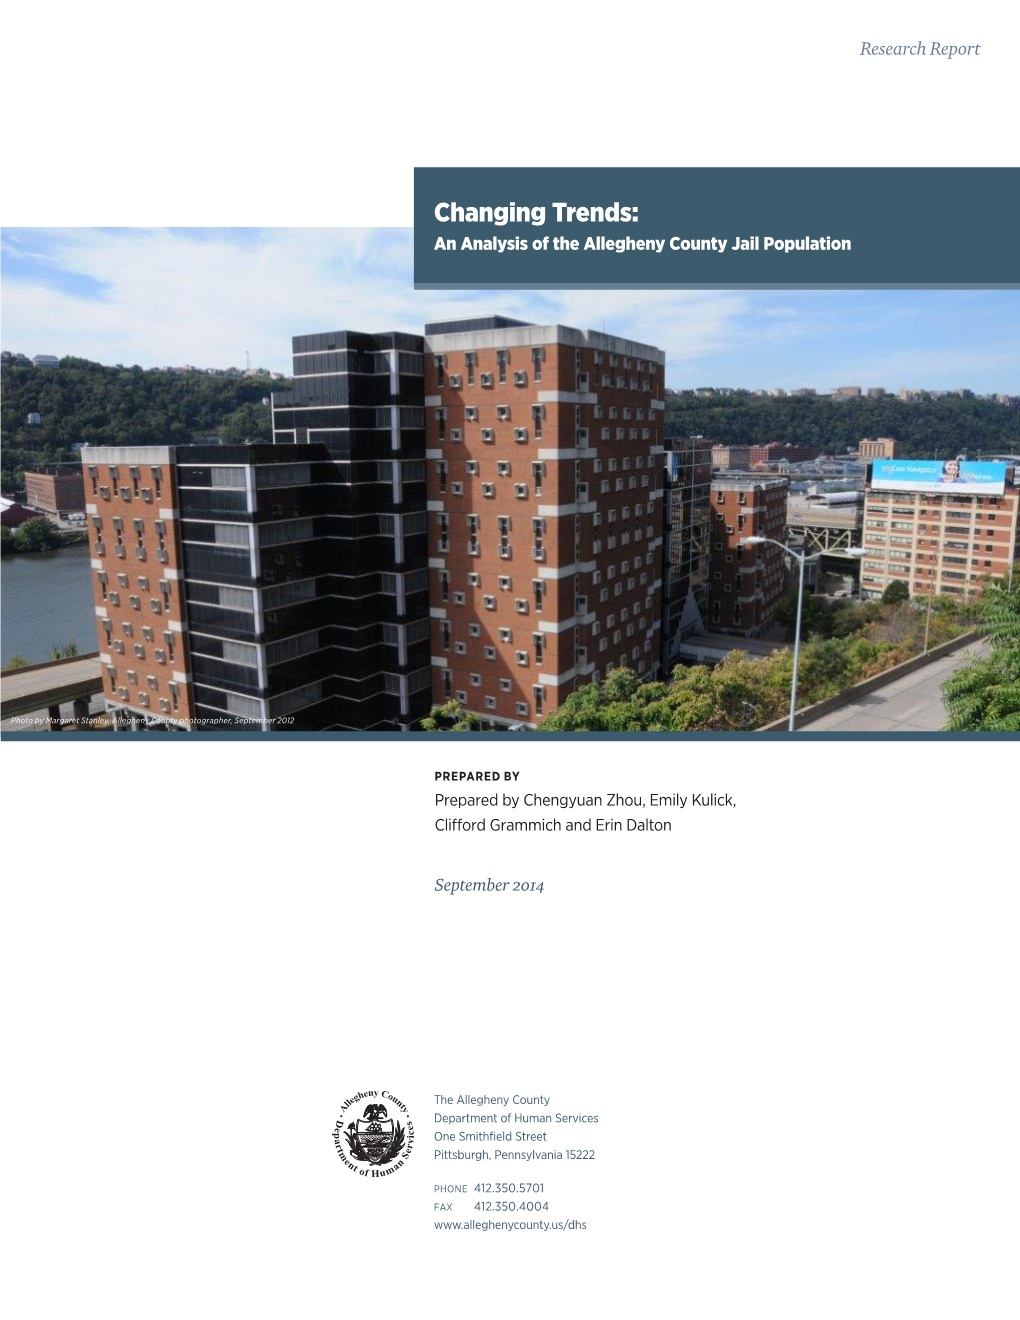 Changing Trends: an Analysis of the Allegheny County Jail Population